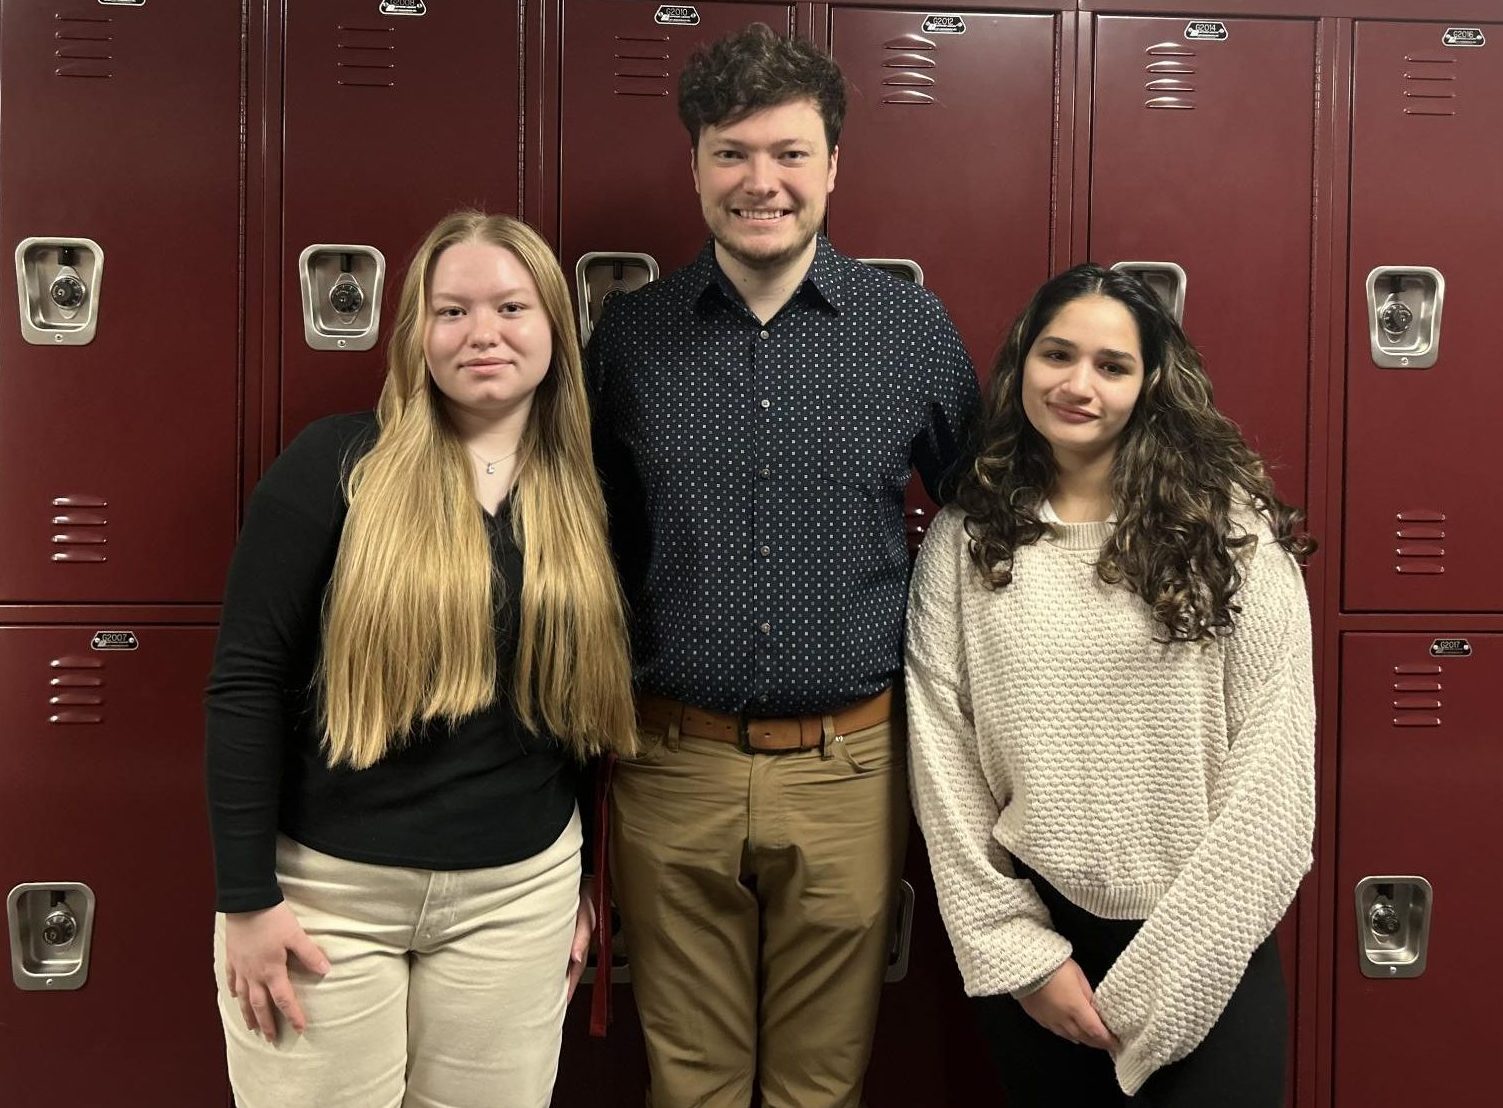 Picture of the Health Science Club leaders: VP, Keira King, advisor, Michael Cavanaugh, and President, Rebecca Chowdhury.